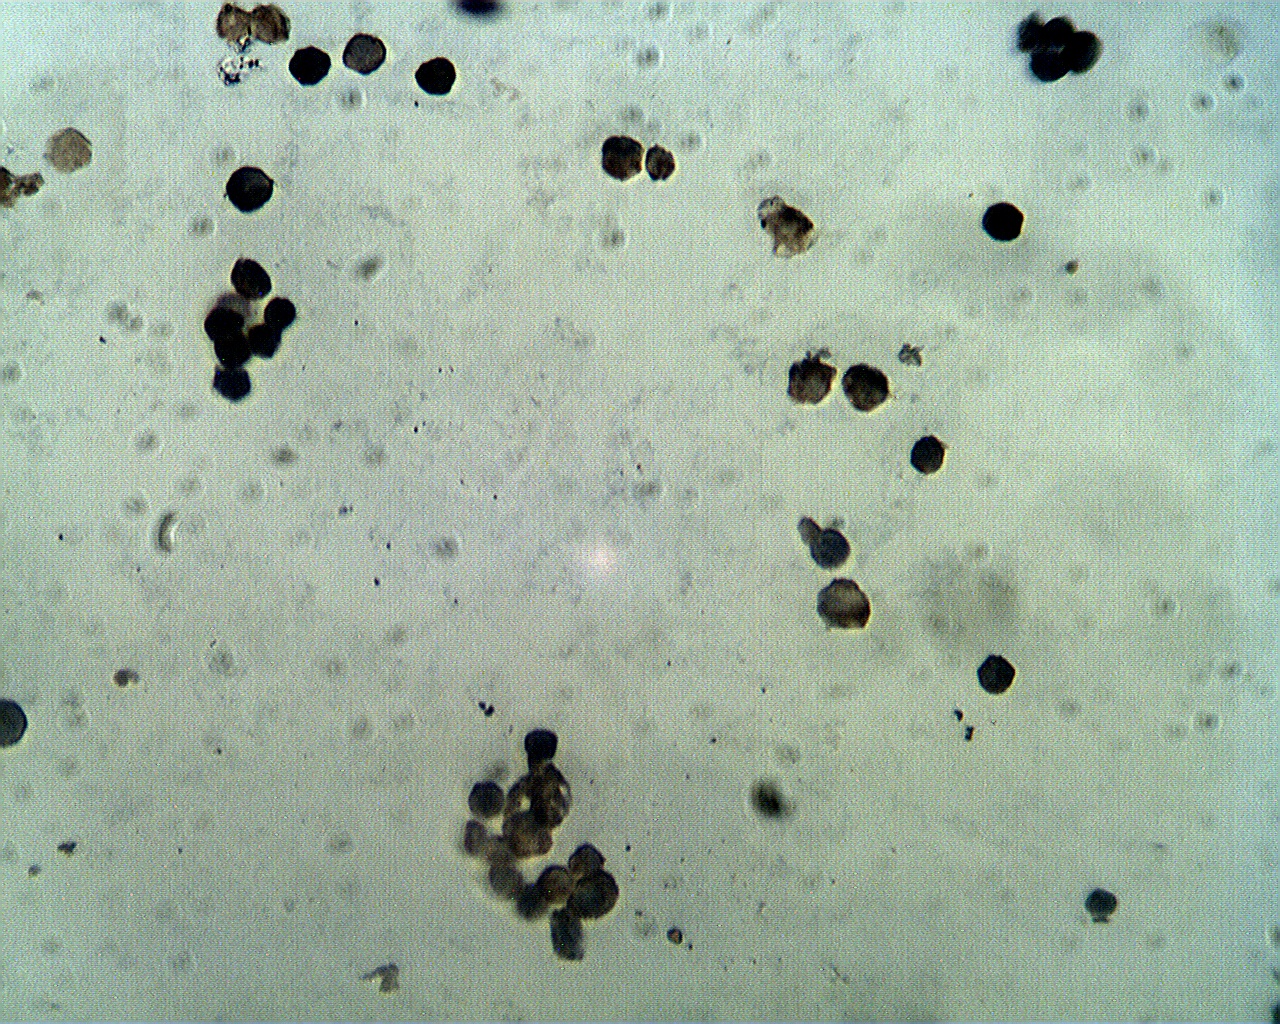 Staining of Hep G2 cells with PCSK9 antibody (Cat. No. X2404P) at 2 µg/ml.